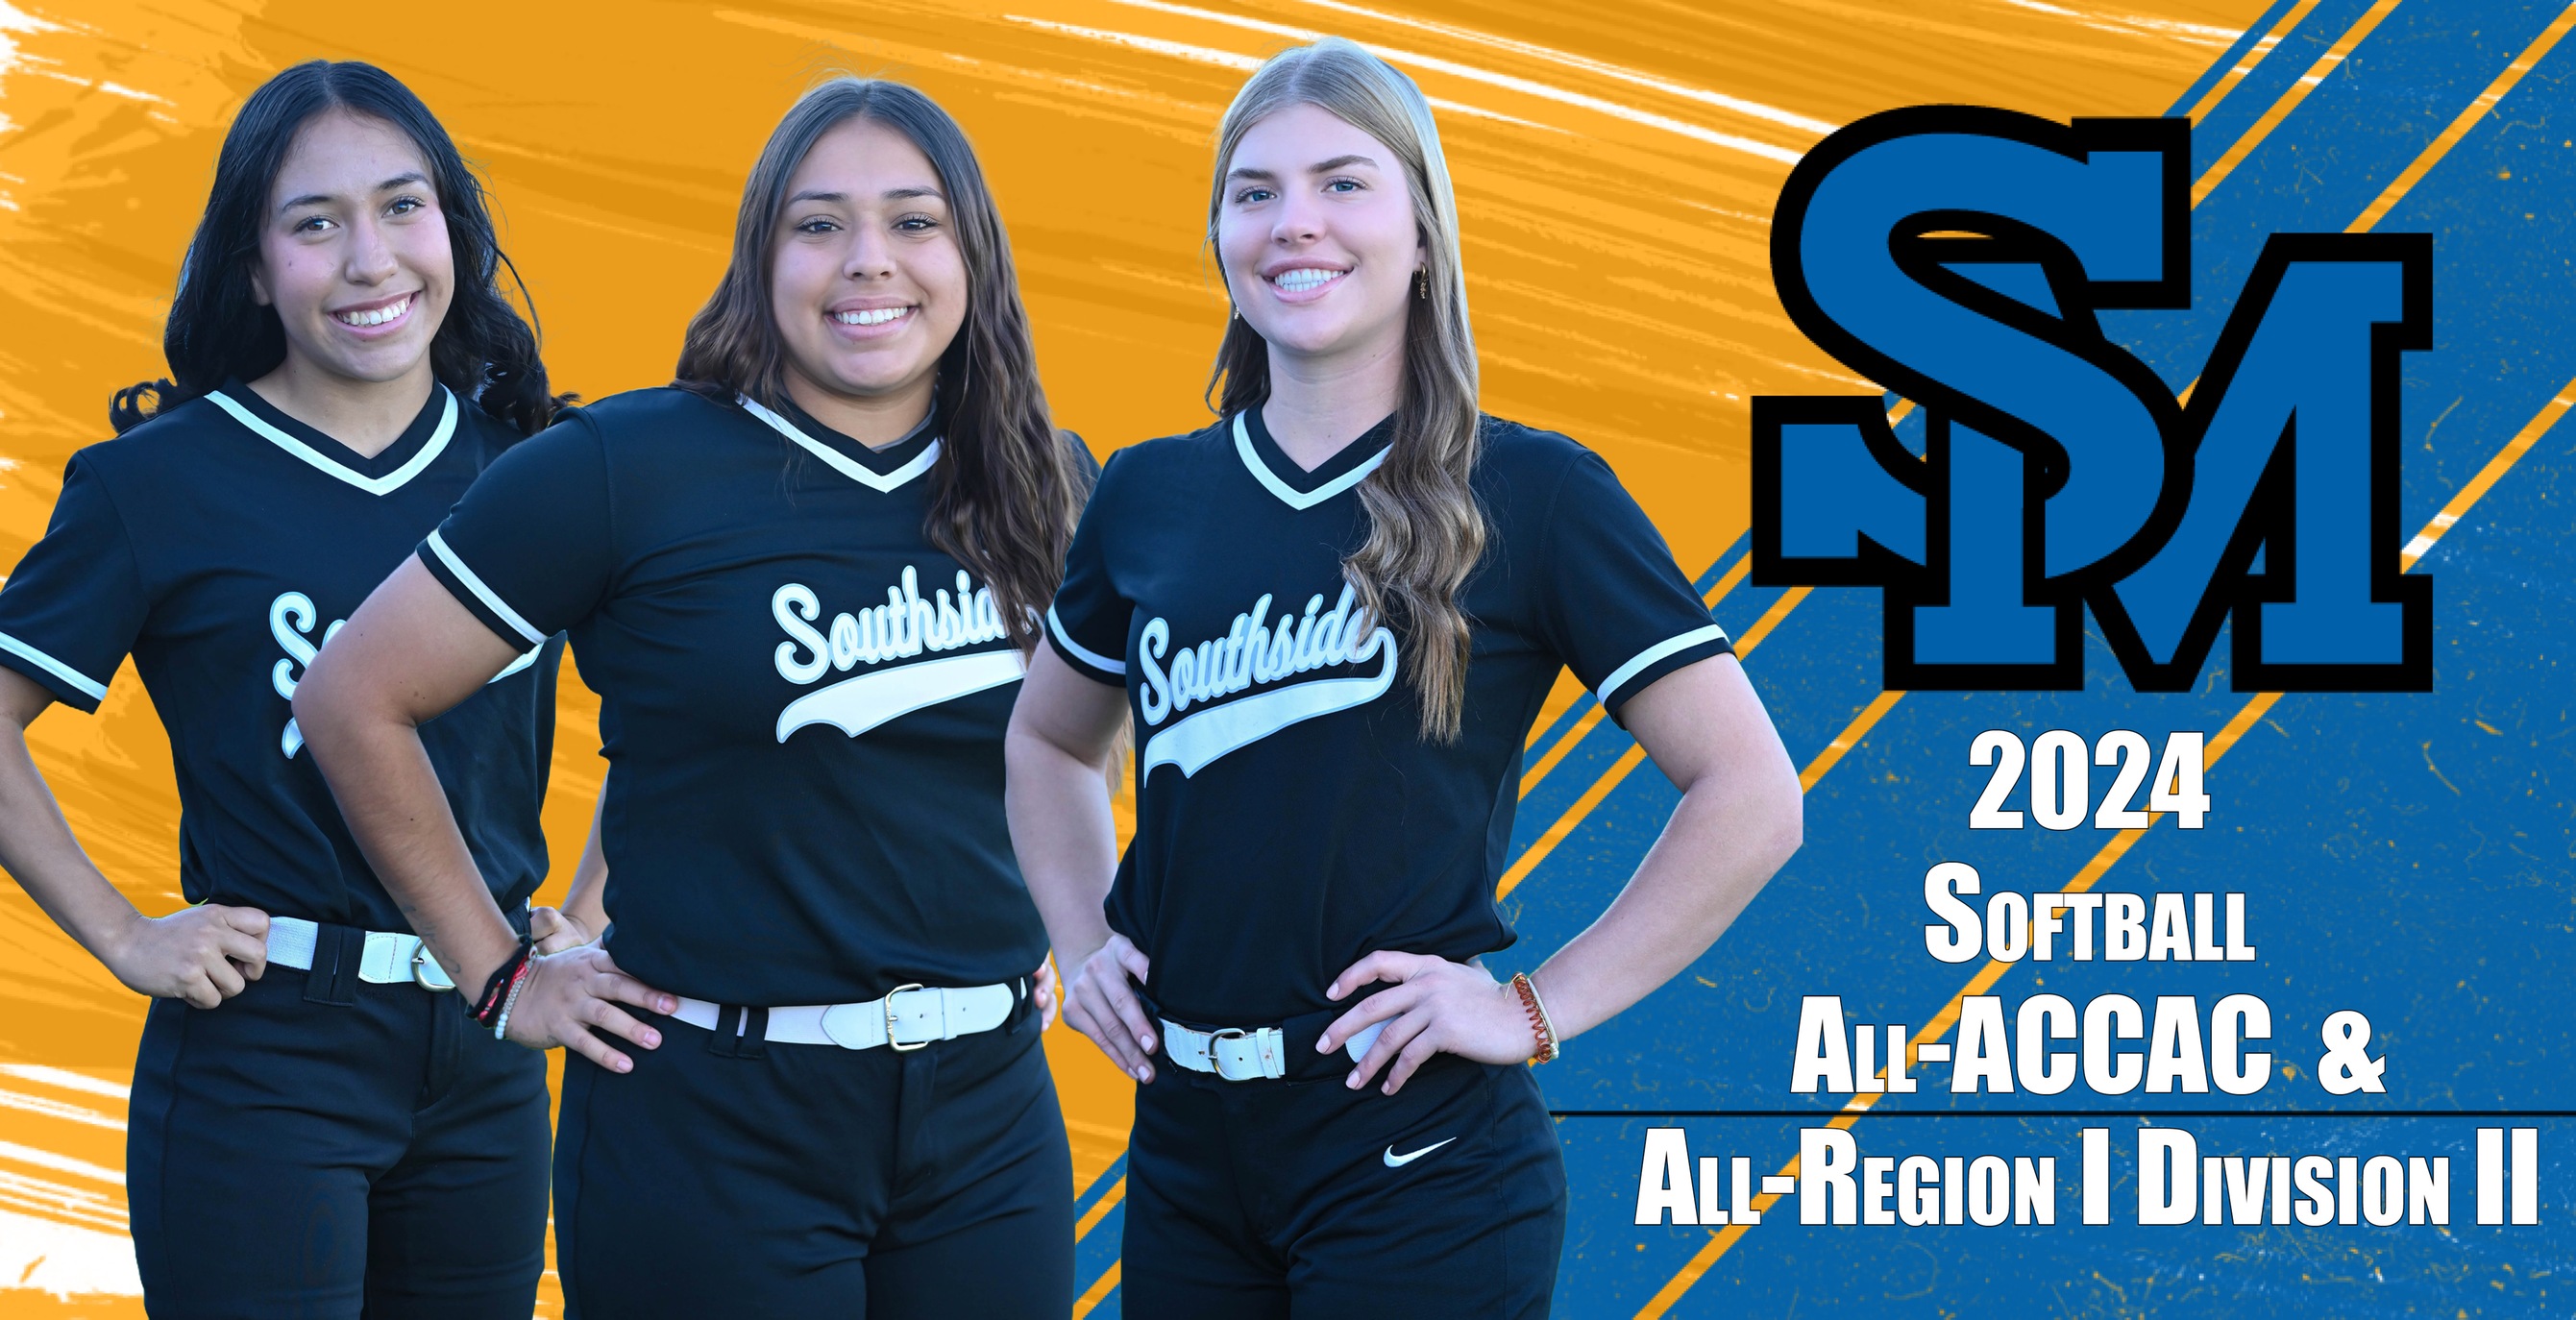 Trio of Cougars Named to 2024 Softball All-ACCAC &amp; All-Region I Teams